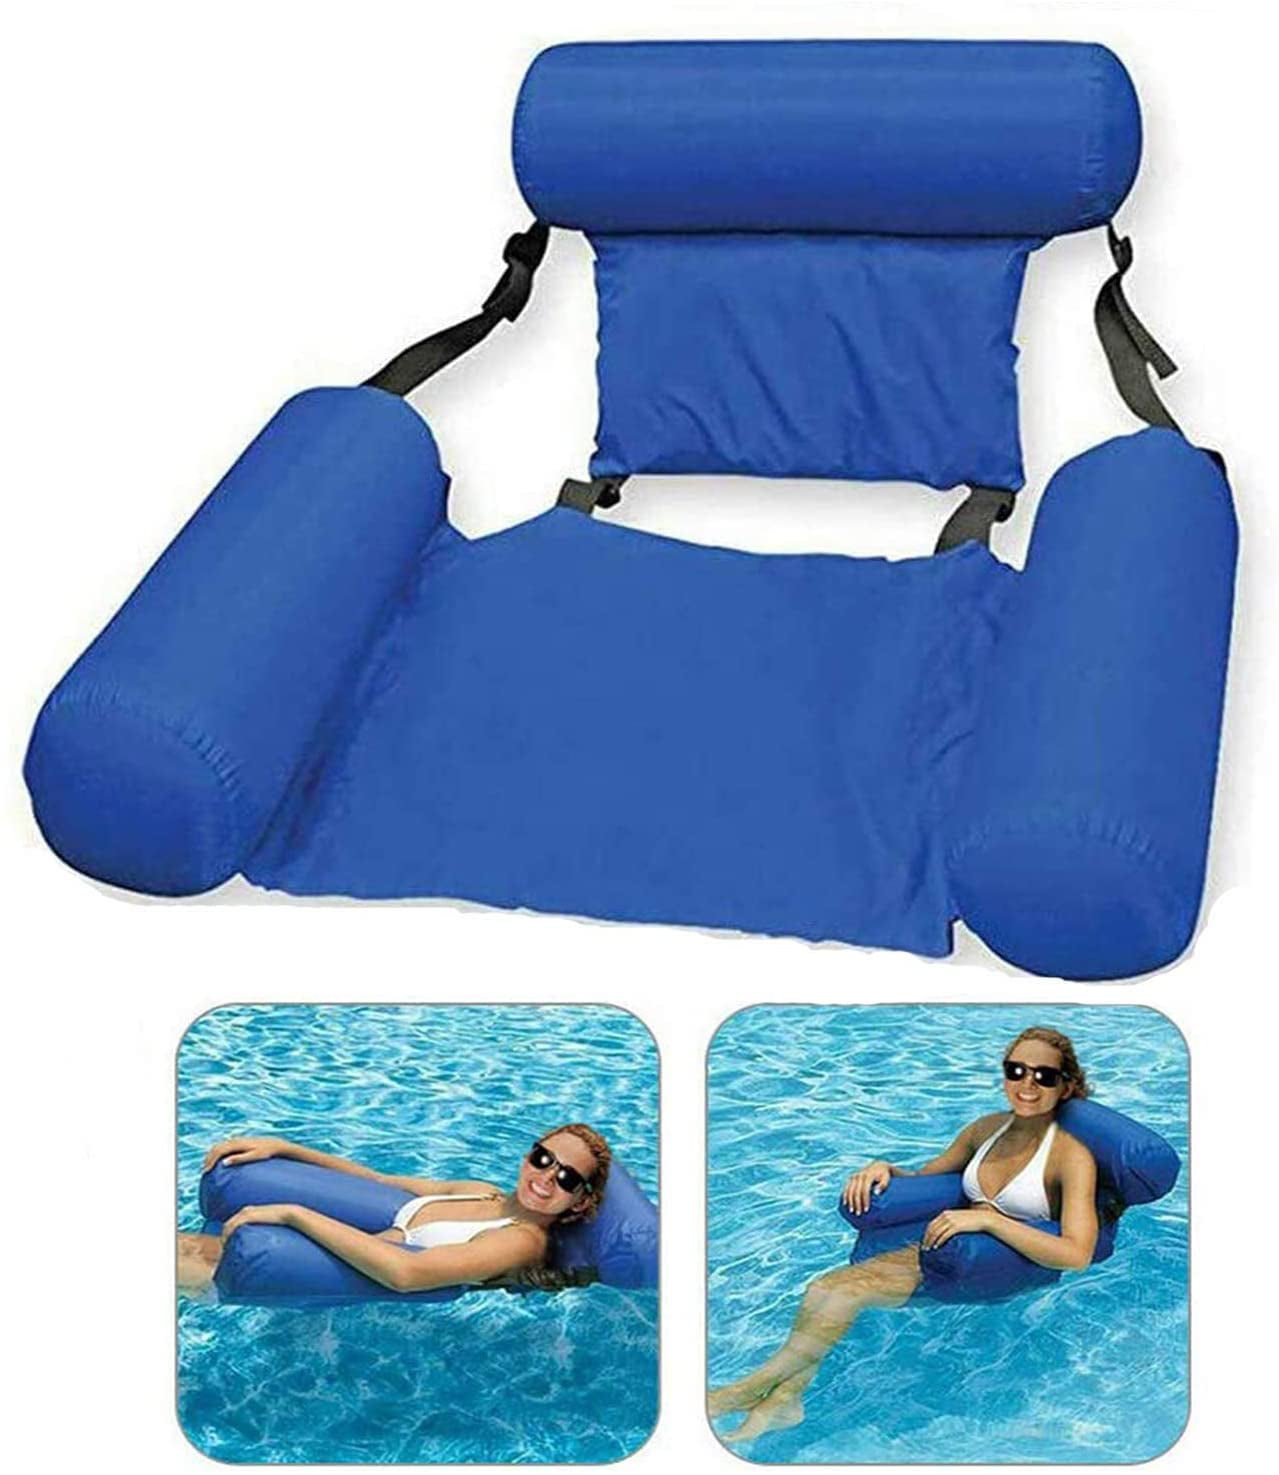 Swimming Chair Inflatable Floating Water Hammock Float Pool Lounge Bed Beach Bed 